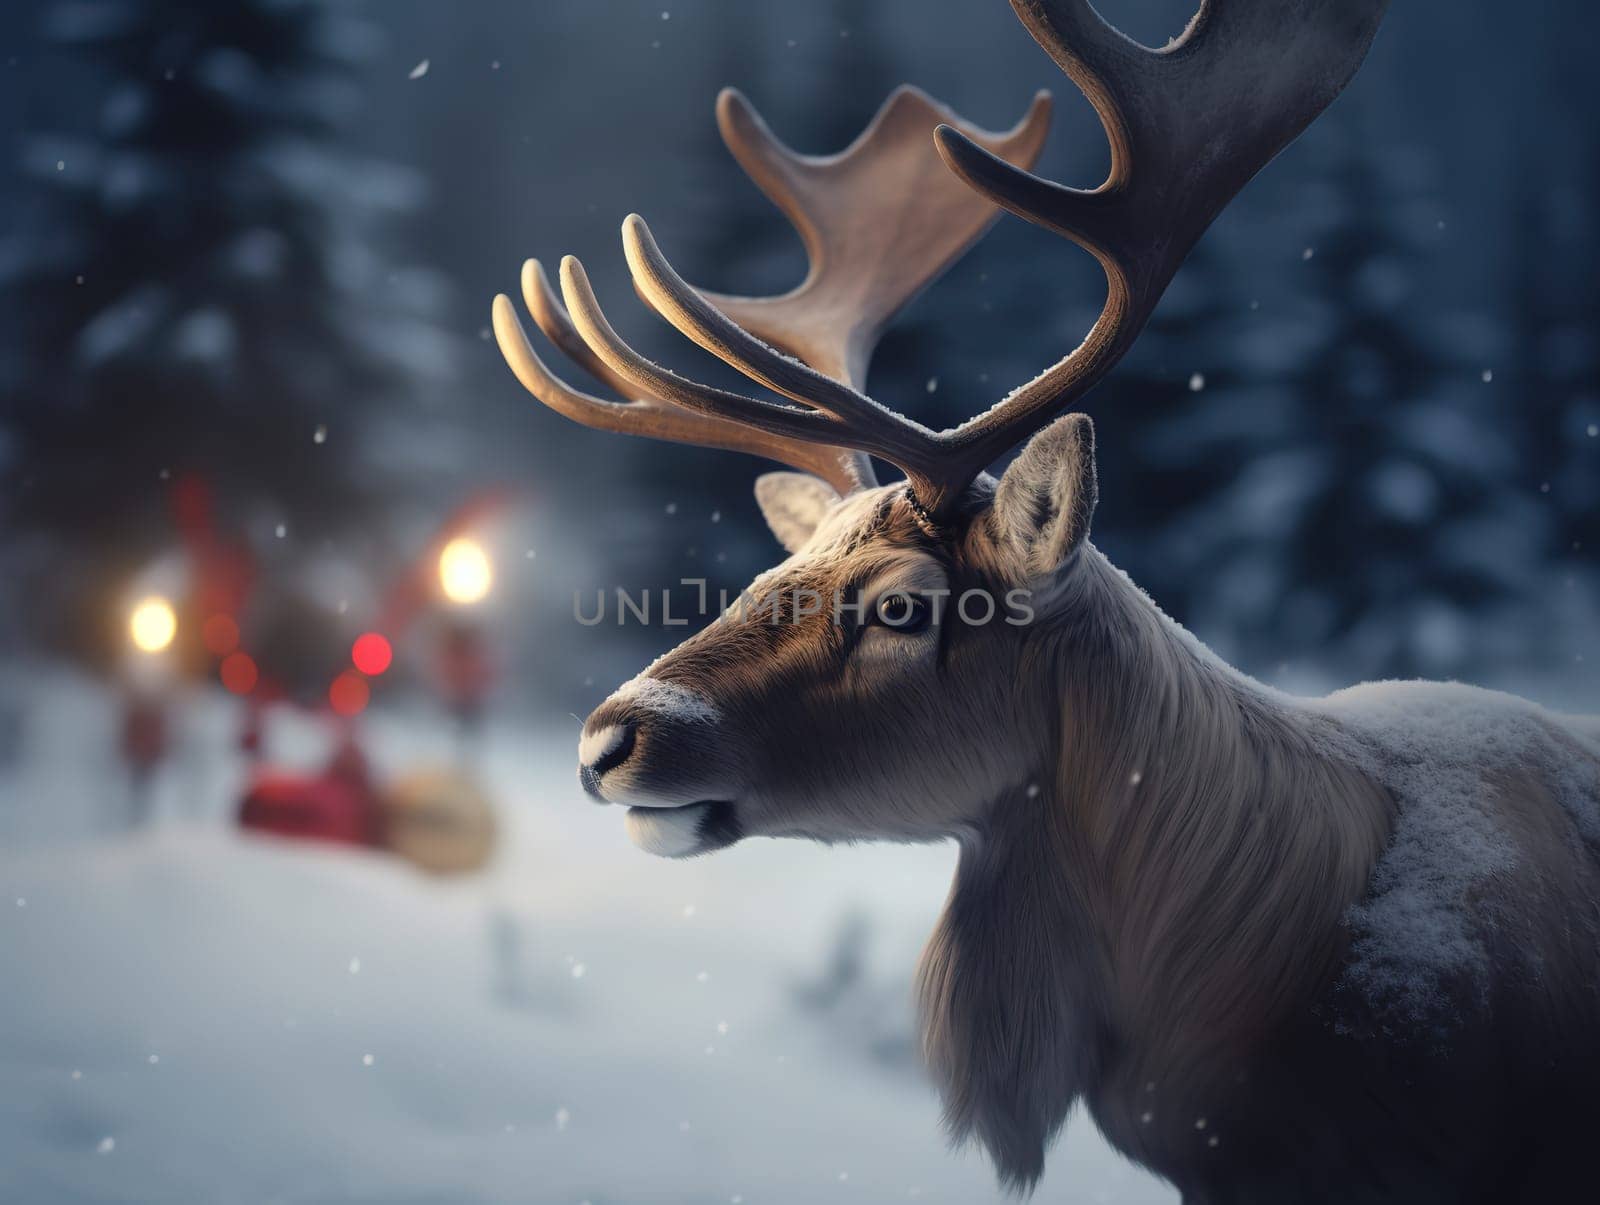 Deer In A Winter Forest, Surrounded By Festive Lights In The Evening, Creates A Magical Scene by GekaSkr